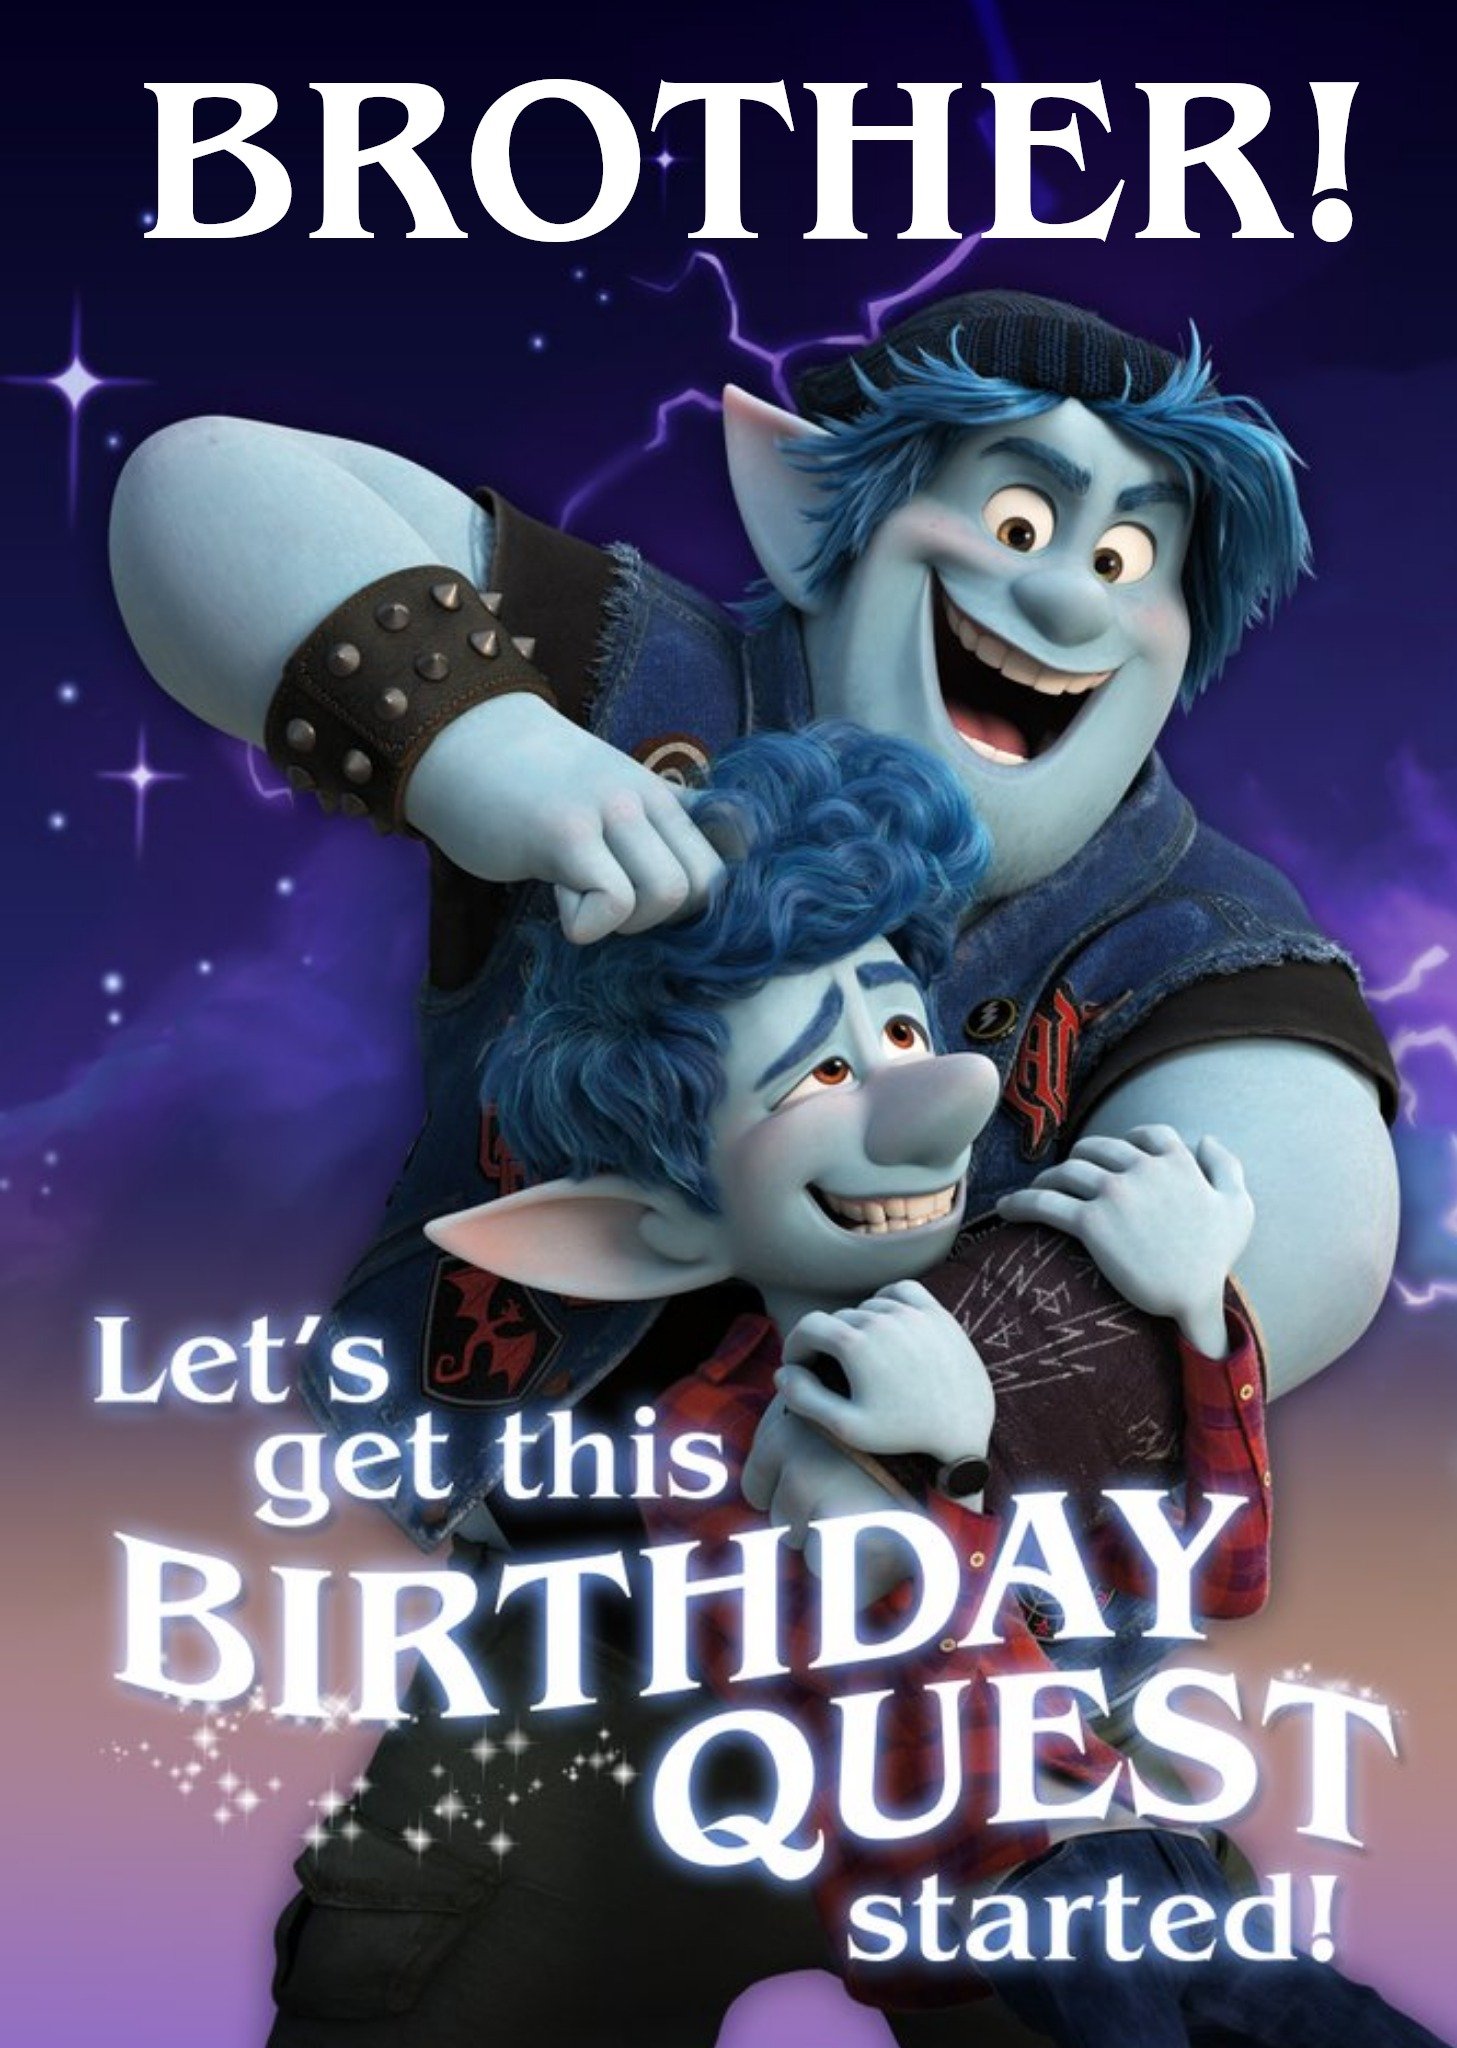 Disney Lets Get This Birthday Quest Started Onward Birthday Card, Large